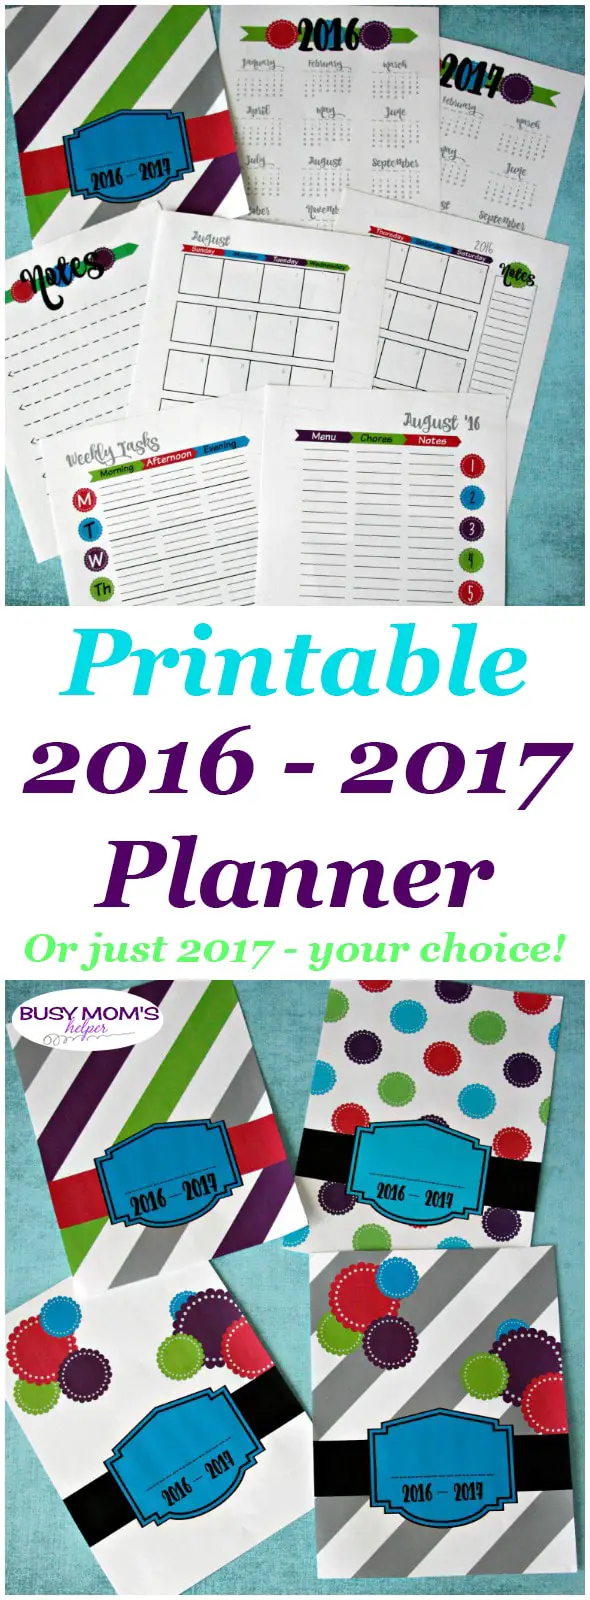 Printable 2016-2017 Planner in bright colors / Also available: Printable 2017 Planner in bright colors (ad)